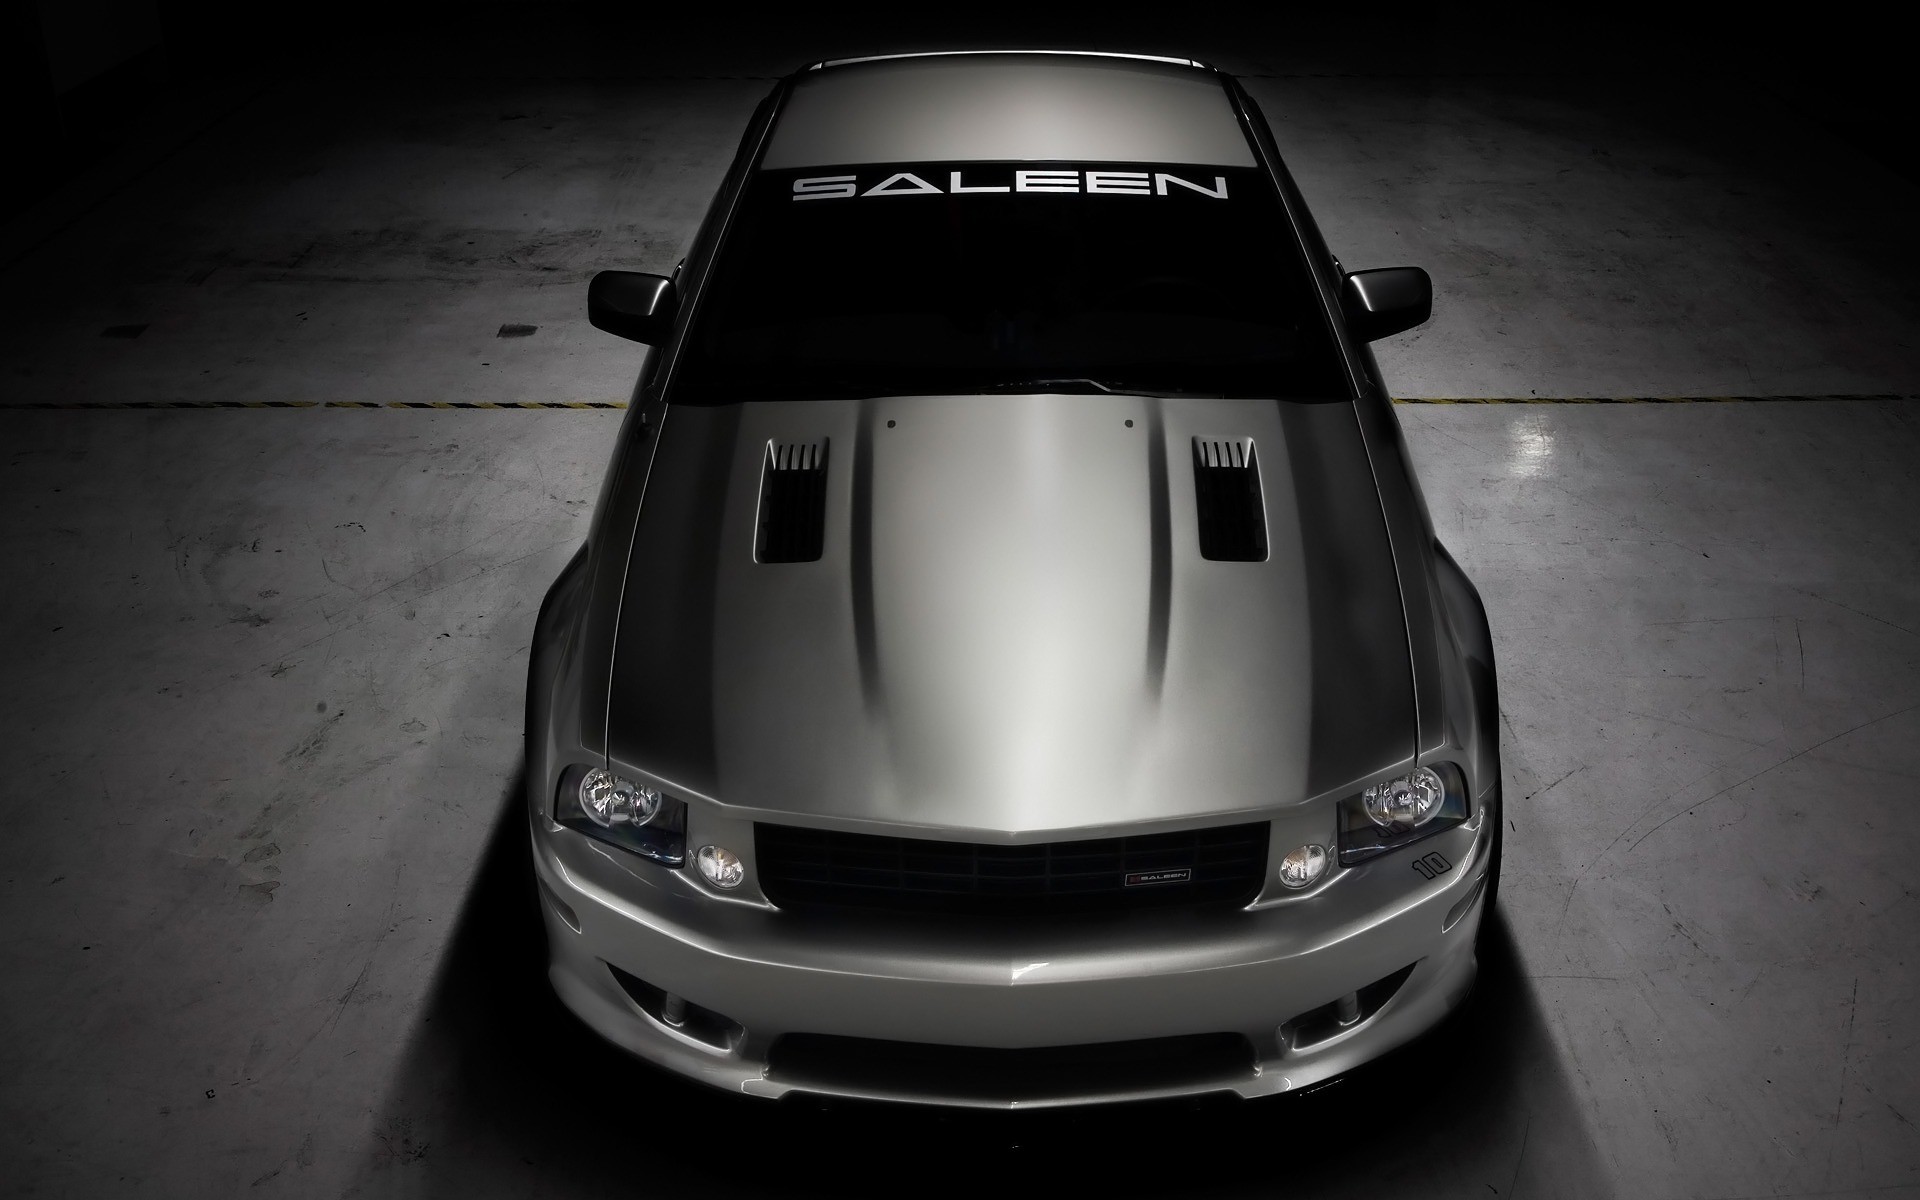 General 1920x1200 car vehicle silver cars Ford Ford Mustang monochrome Saleen Ford Mustang S-197 muscle cars American cars